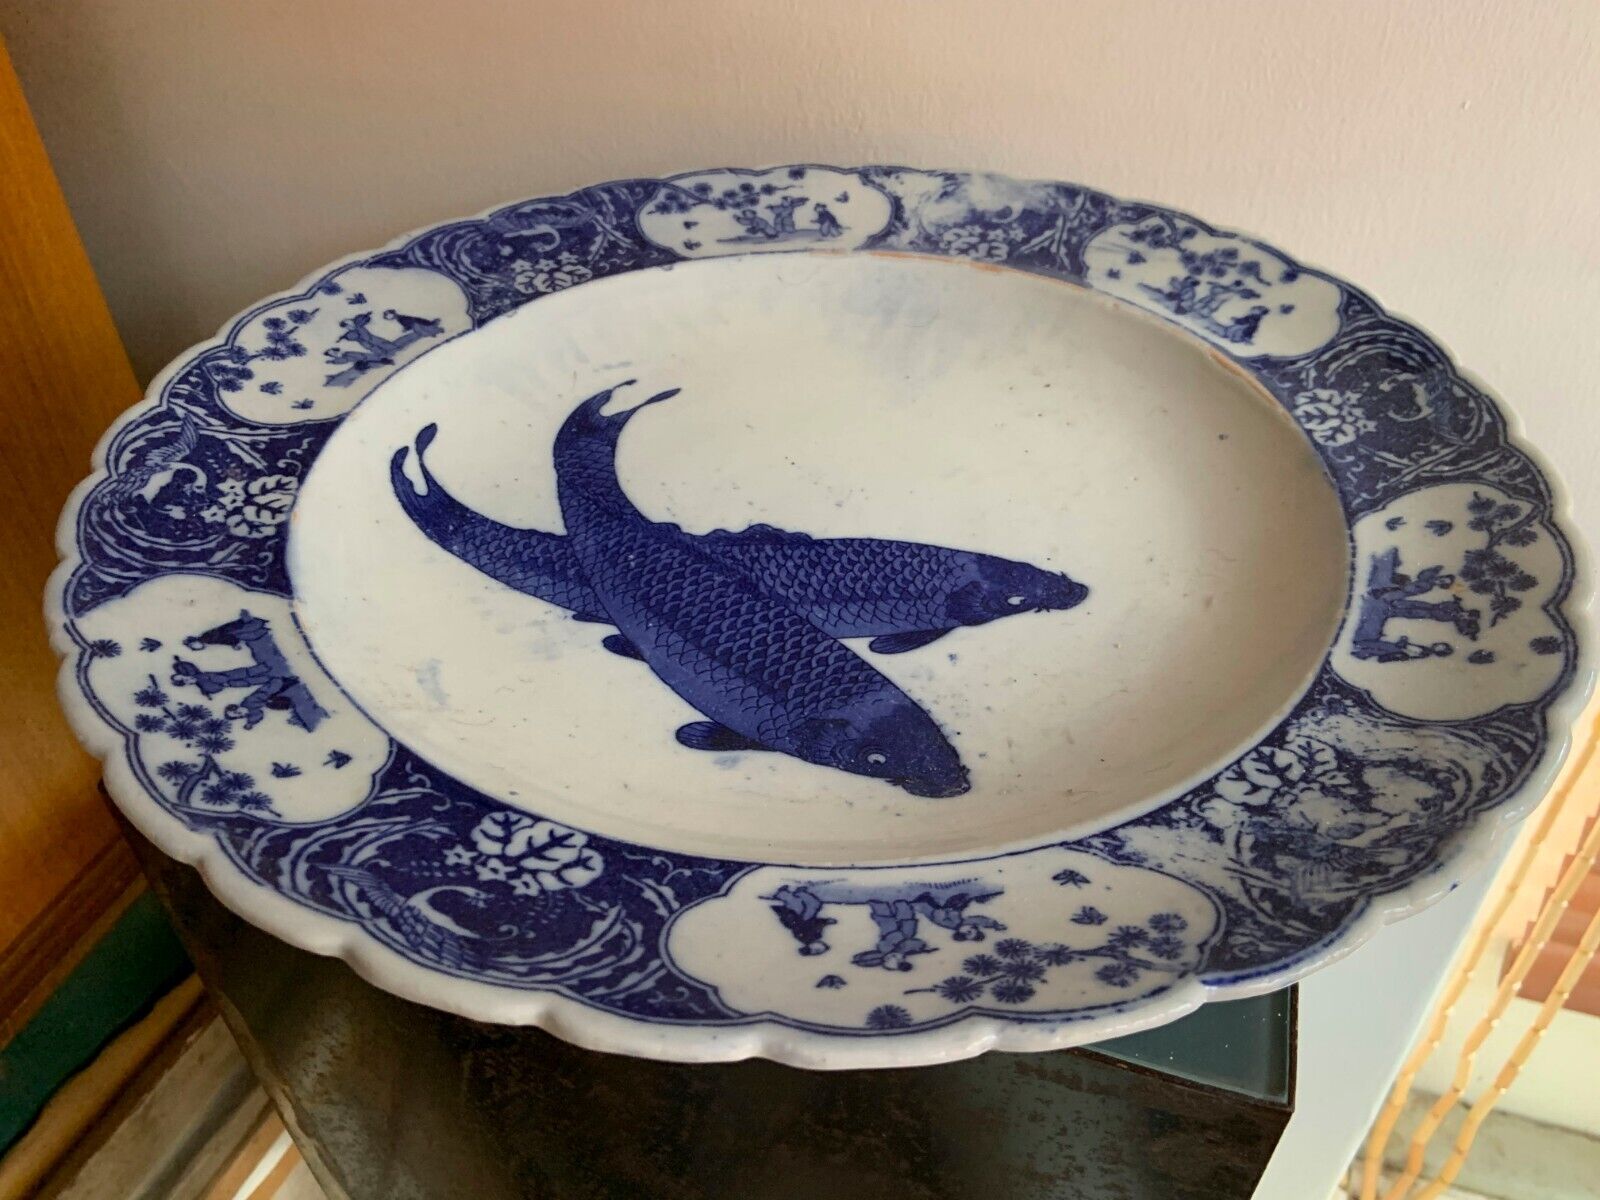 Beautiful Japanese fish plate late 19th / early 20th century